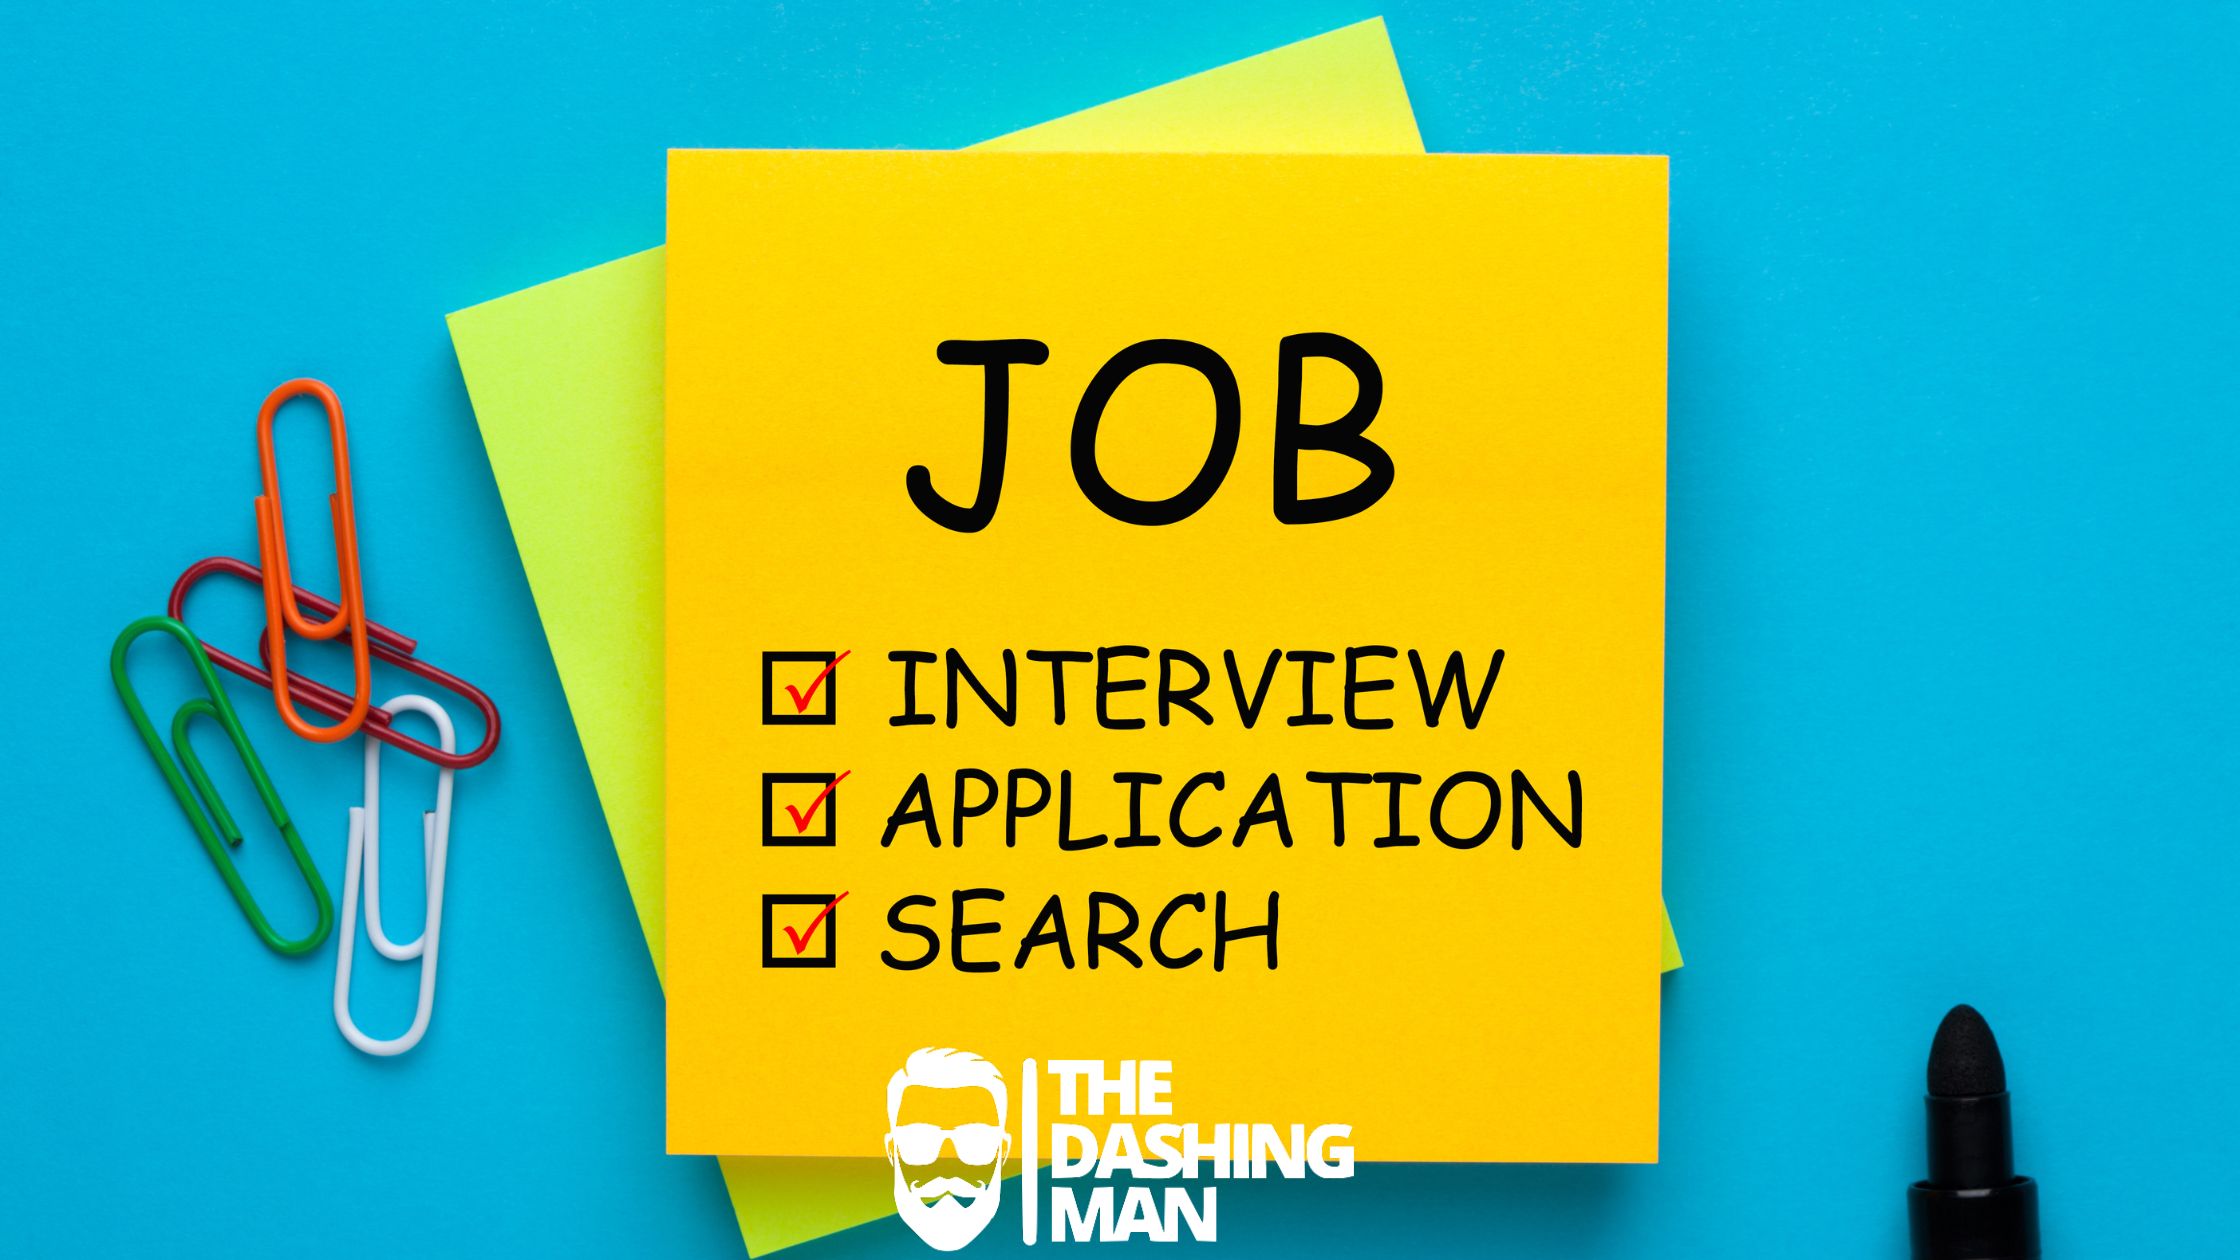 Acing Common Interview Questions Tips for Men